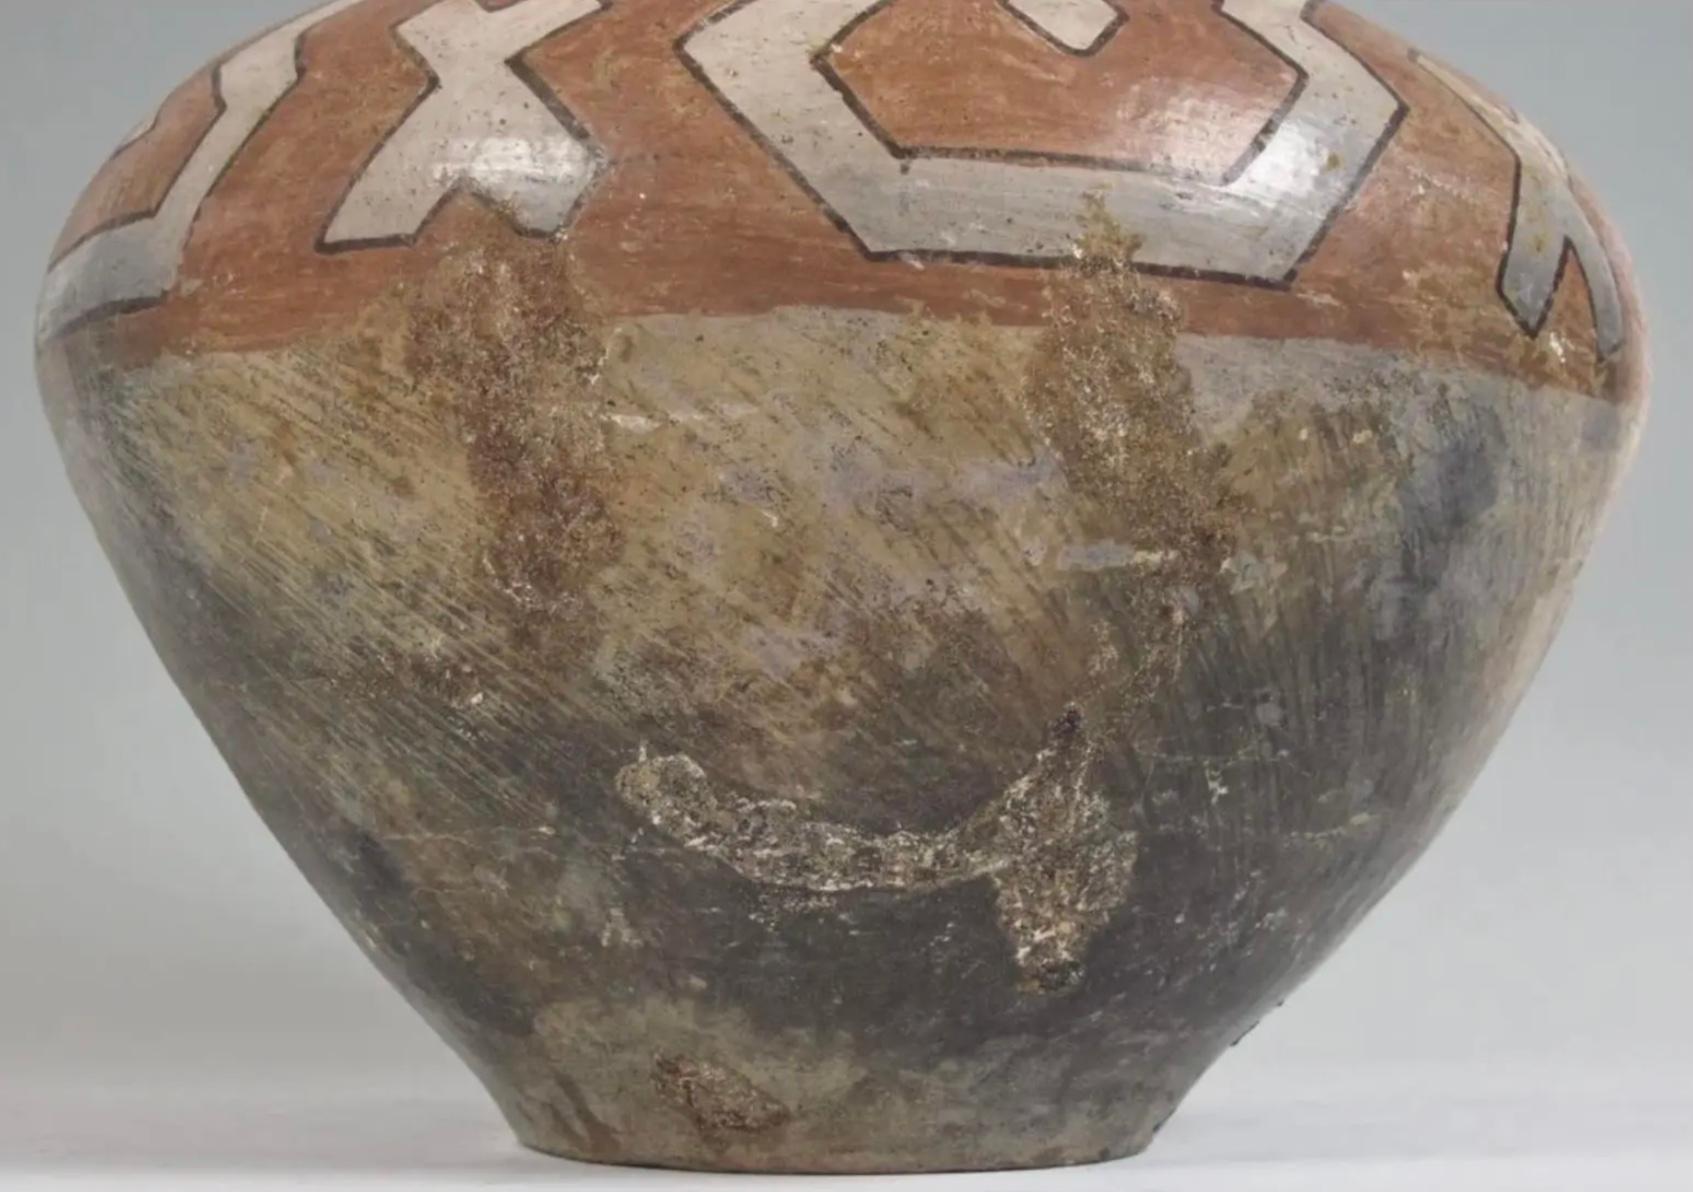 Large Peruvian Shipibo Polychrome Geometric Ceramic Pot. This type of large, fired slipware earthenware pots was traditionally used as a beer storage vessel for communal ceremonies. The Shipibo of the Ucayali River, a southern tributary of the Upper